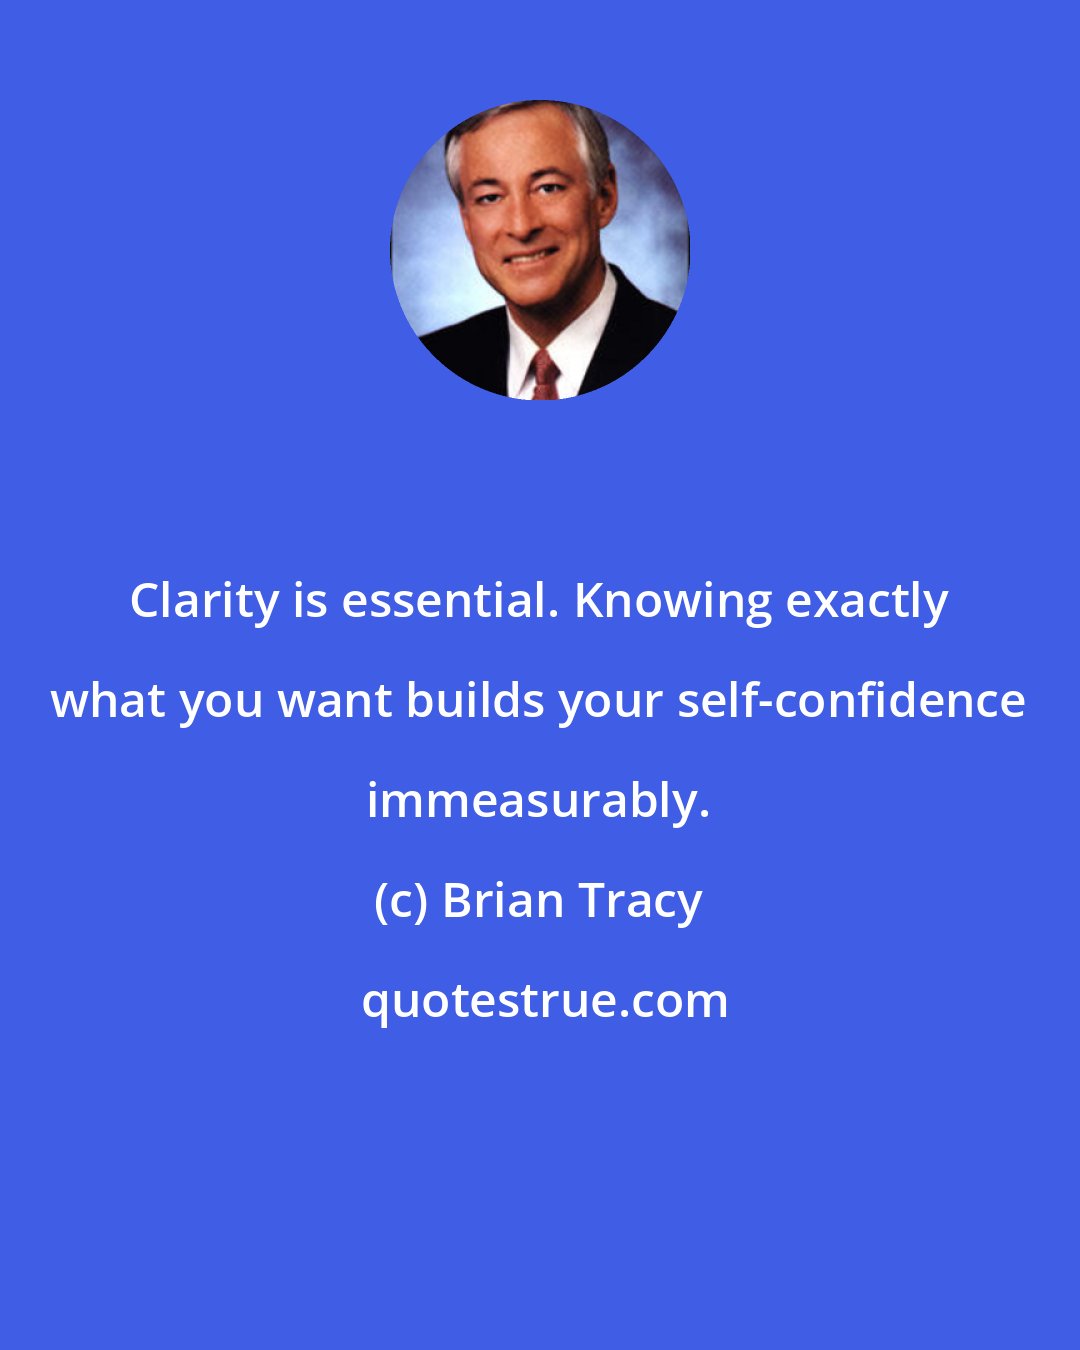 Brian Tracy: Clarity is essential. Knowing exactly what you want builds your self-confidence immeasurably.